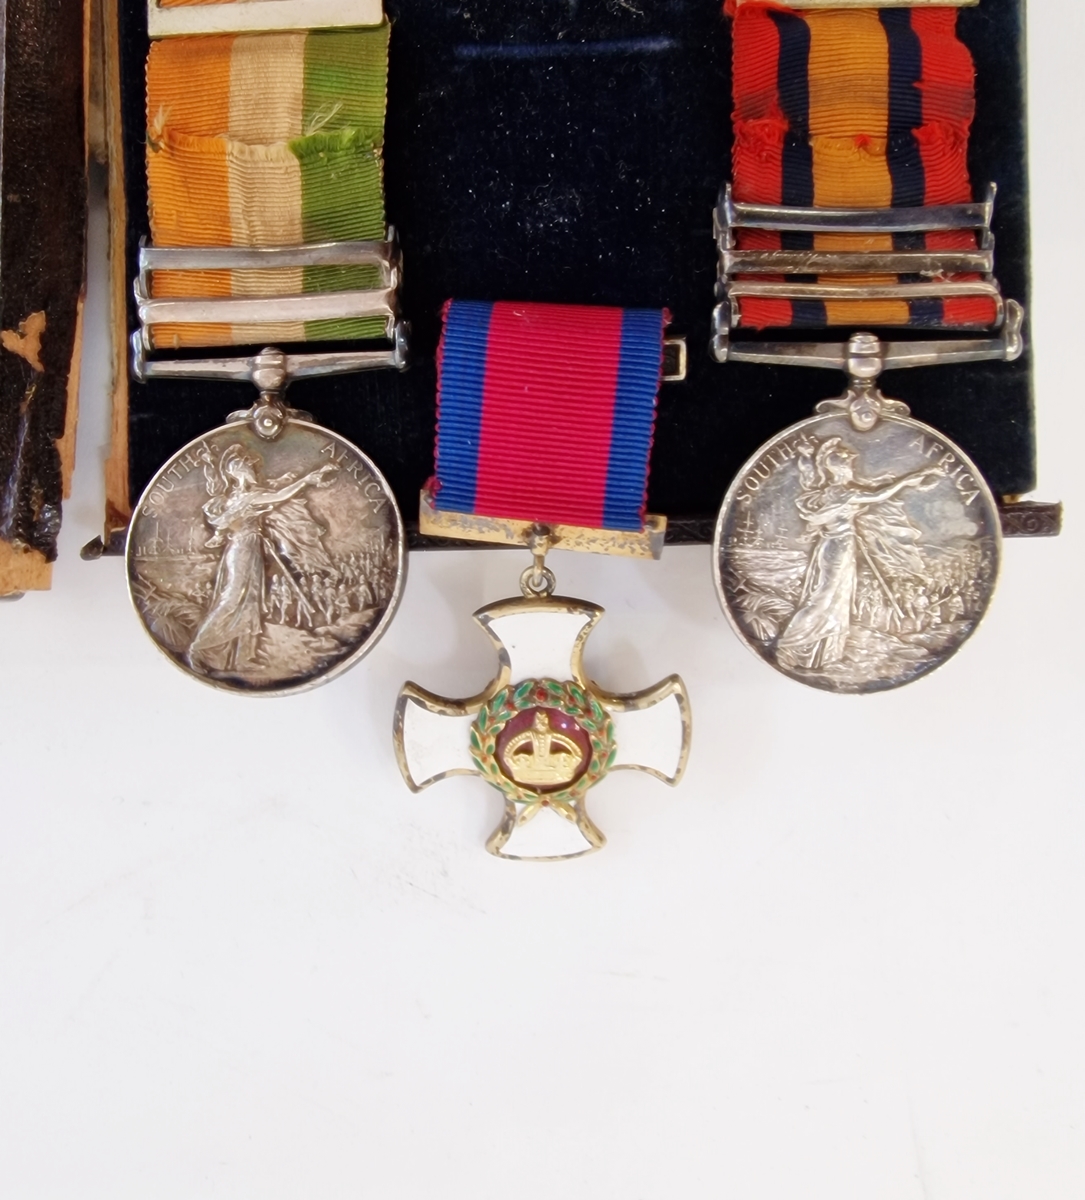 Distinguished Service Order Medal group comprising of Queens South Africa Medal with clasps, - Image 17 of 24